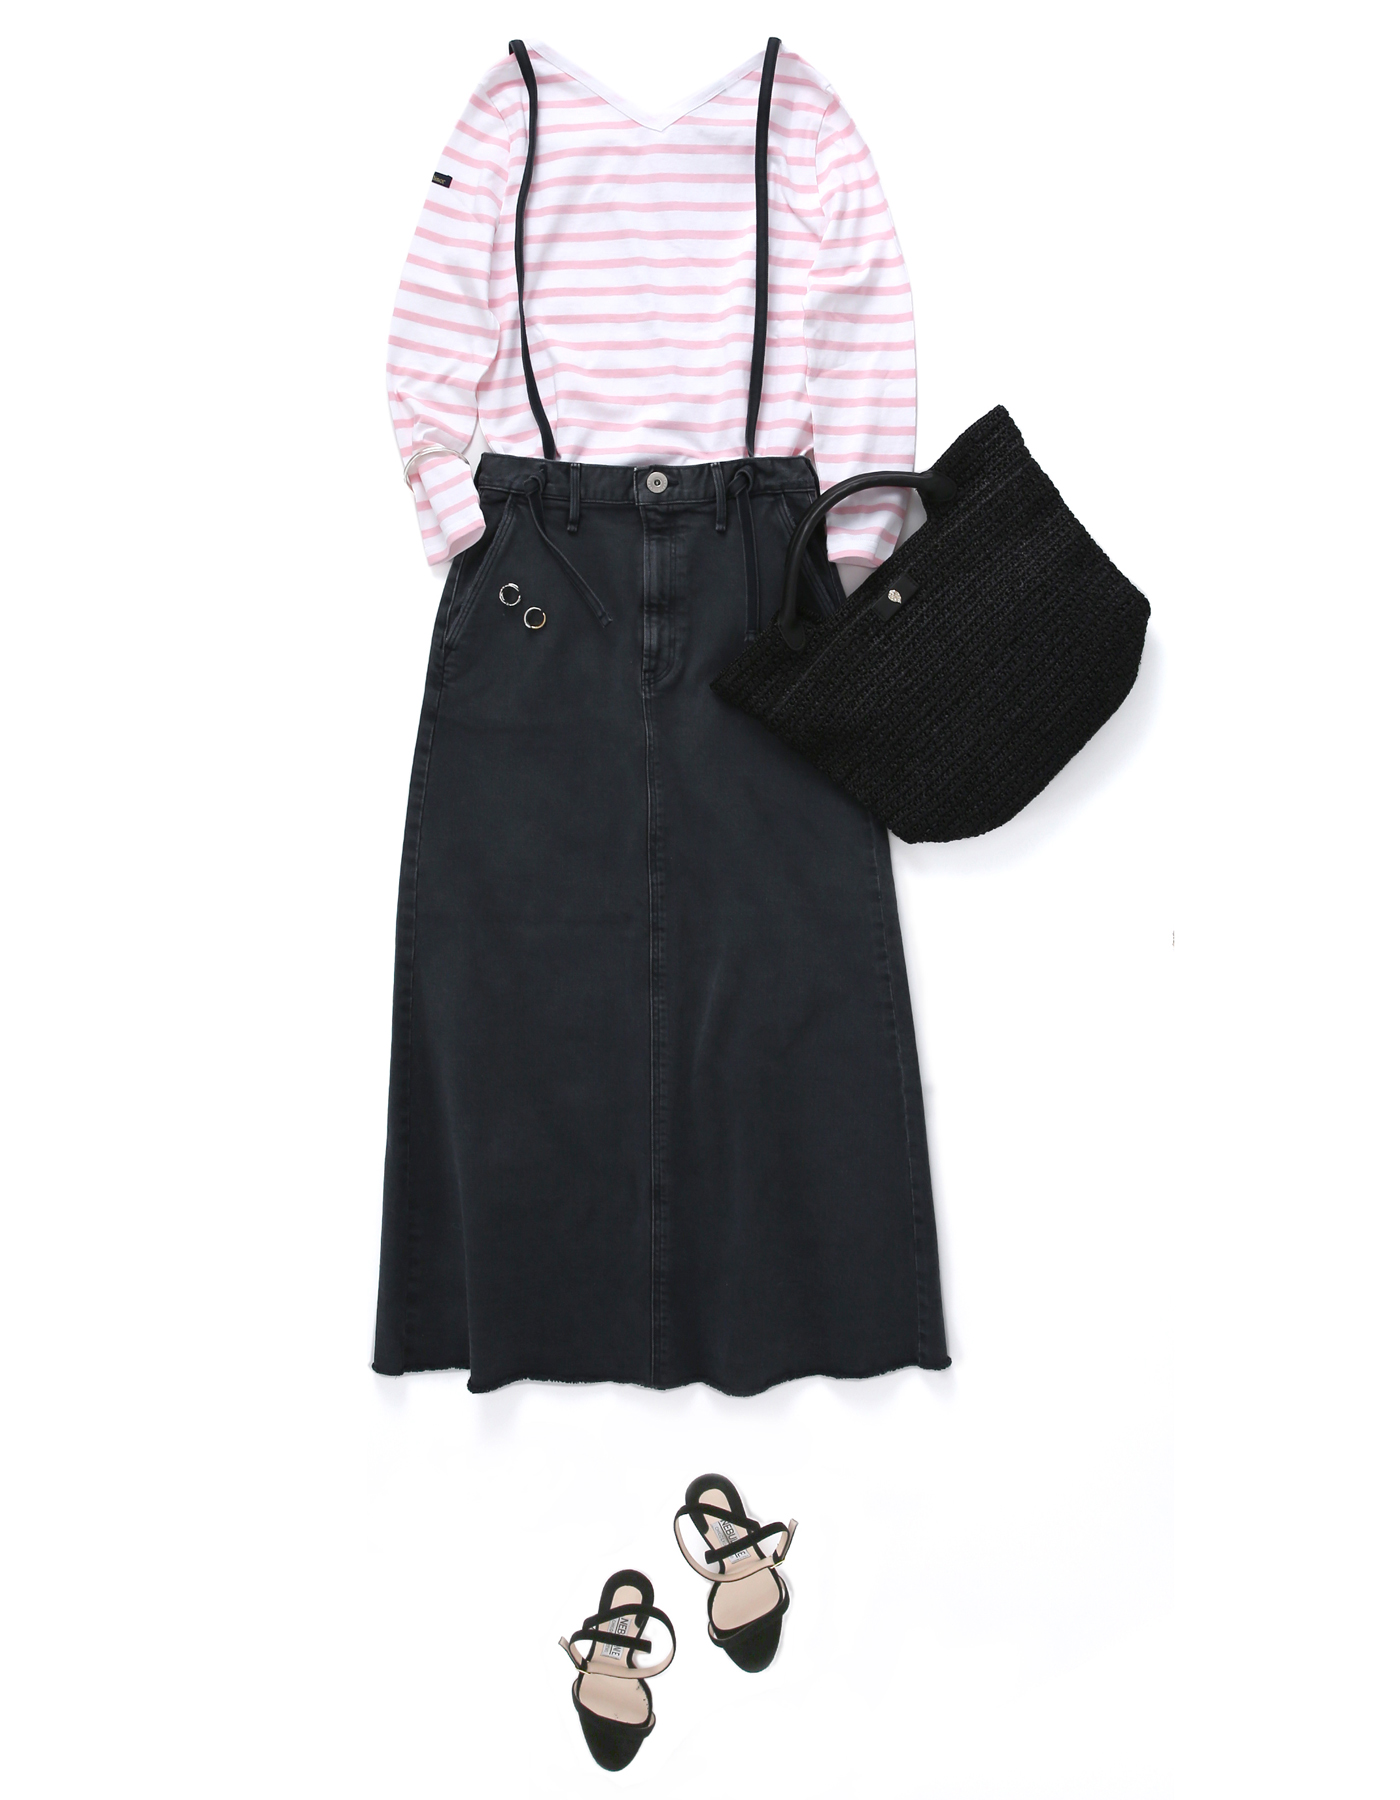 Spring outfit coordinate.03